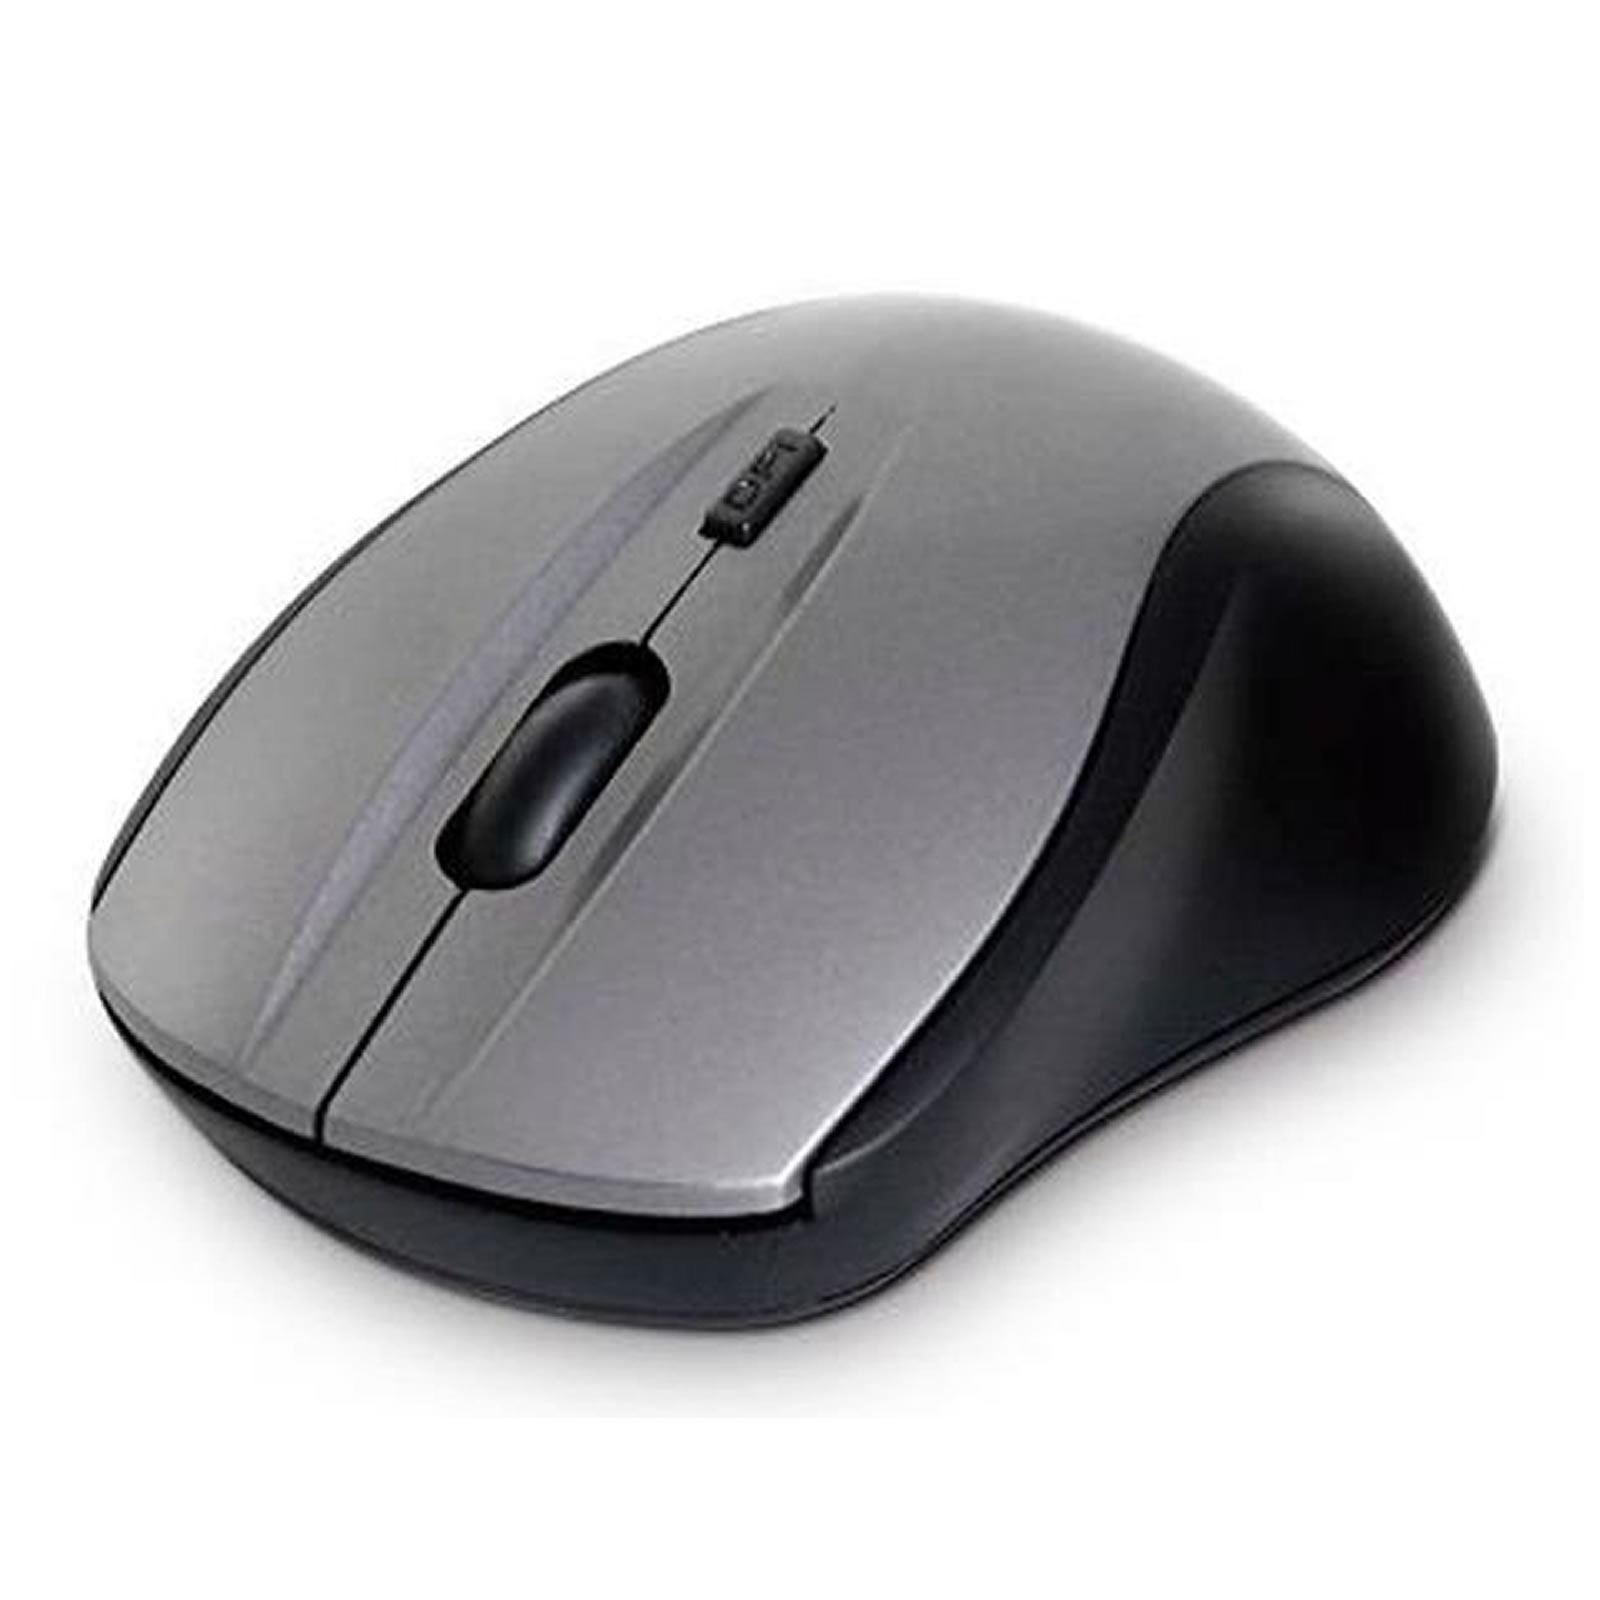 Compoint M362W Wireless 2.4GHz 3 Button Optical Mouse with Compact ...